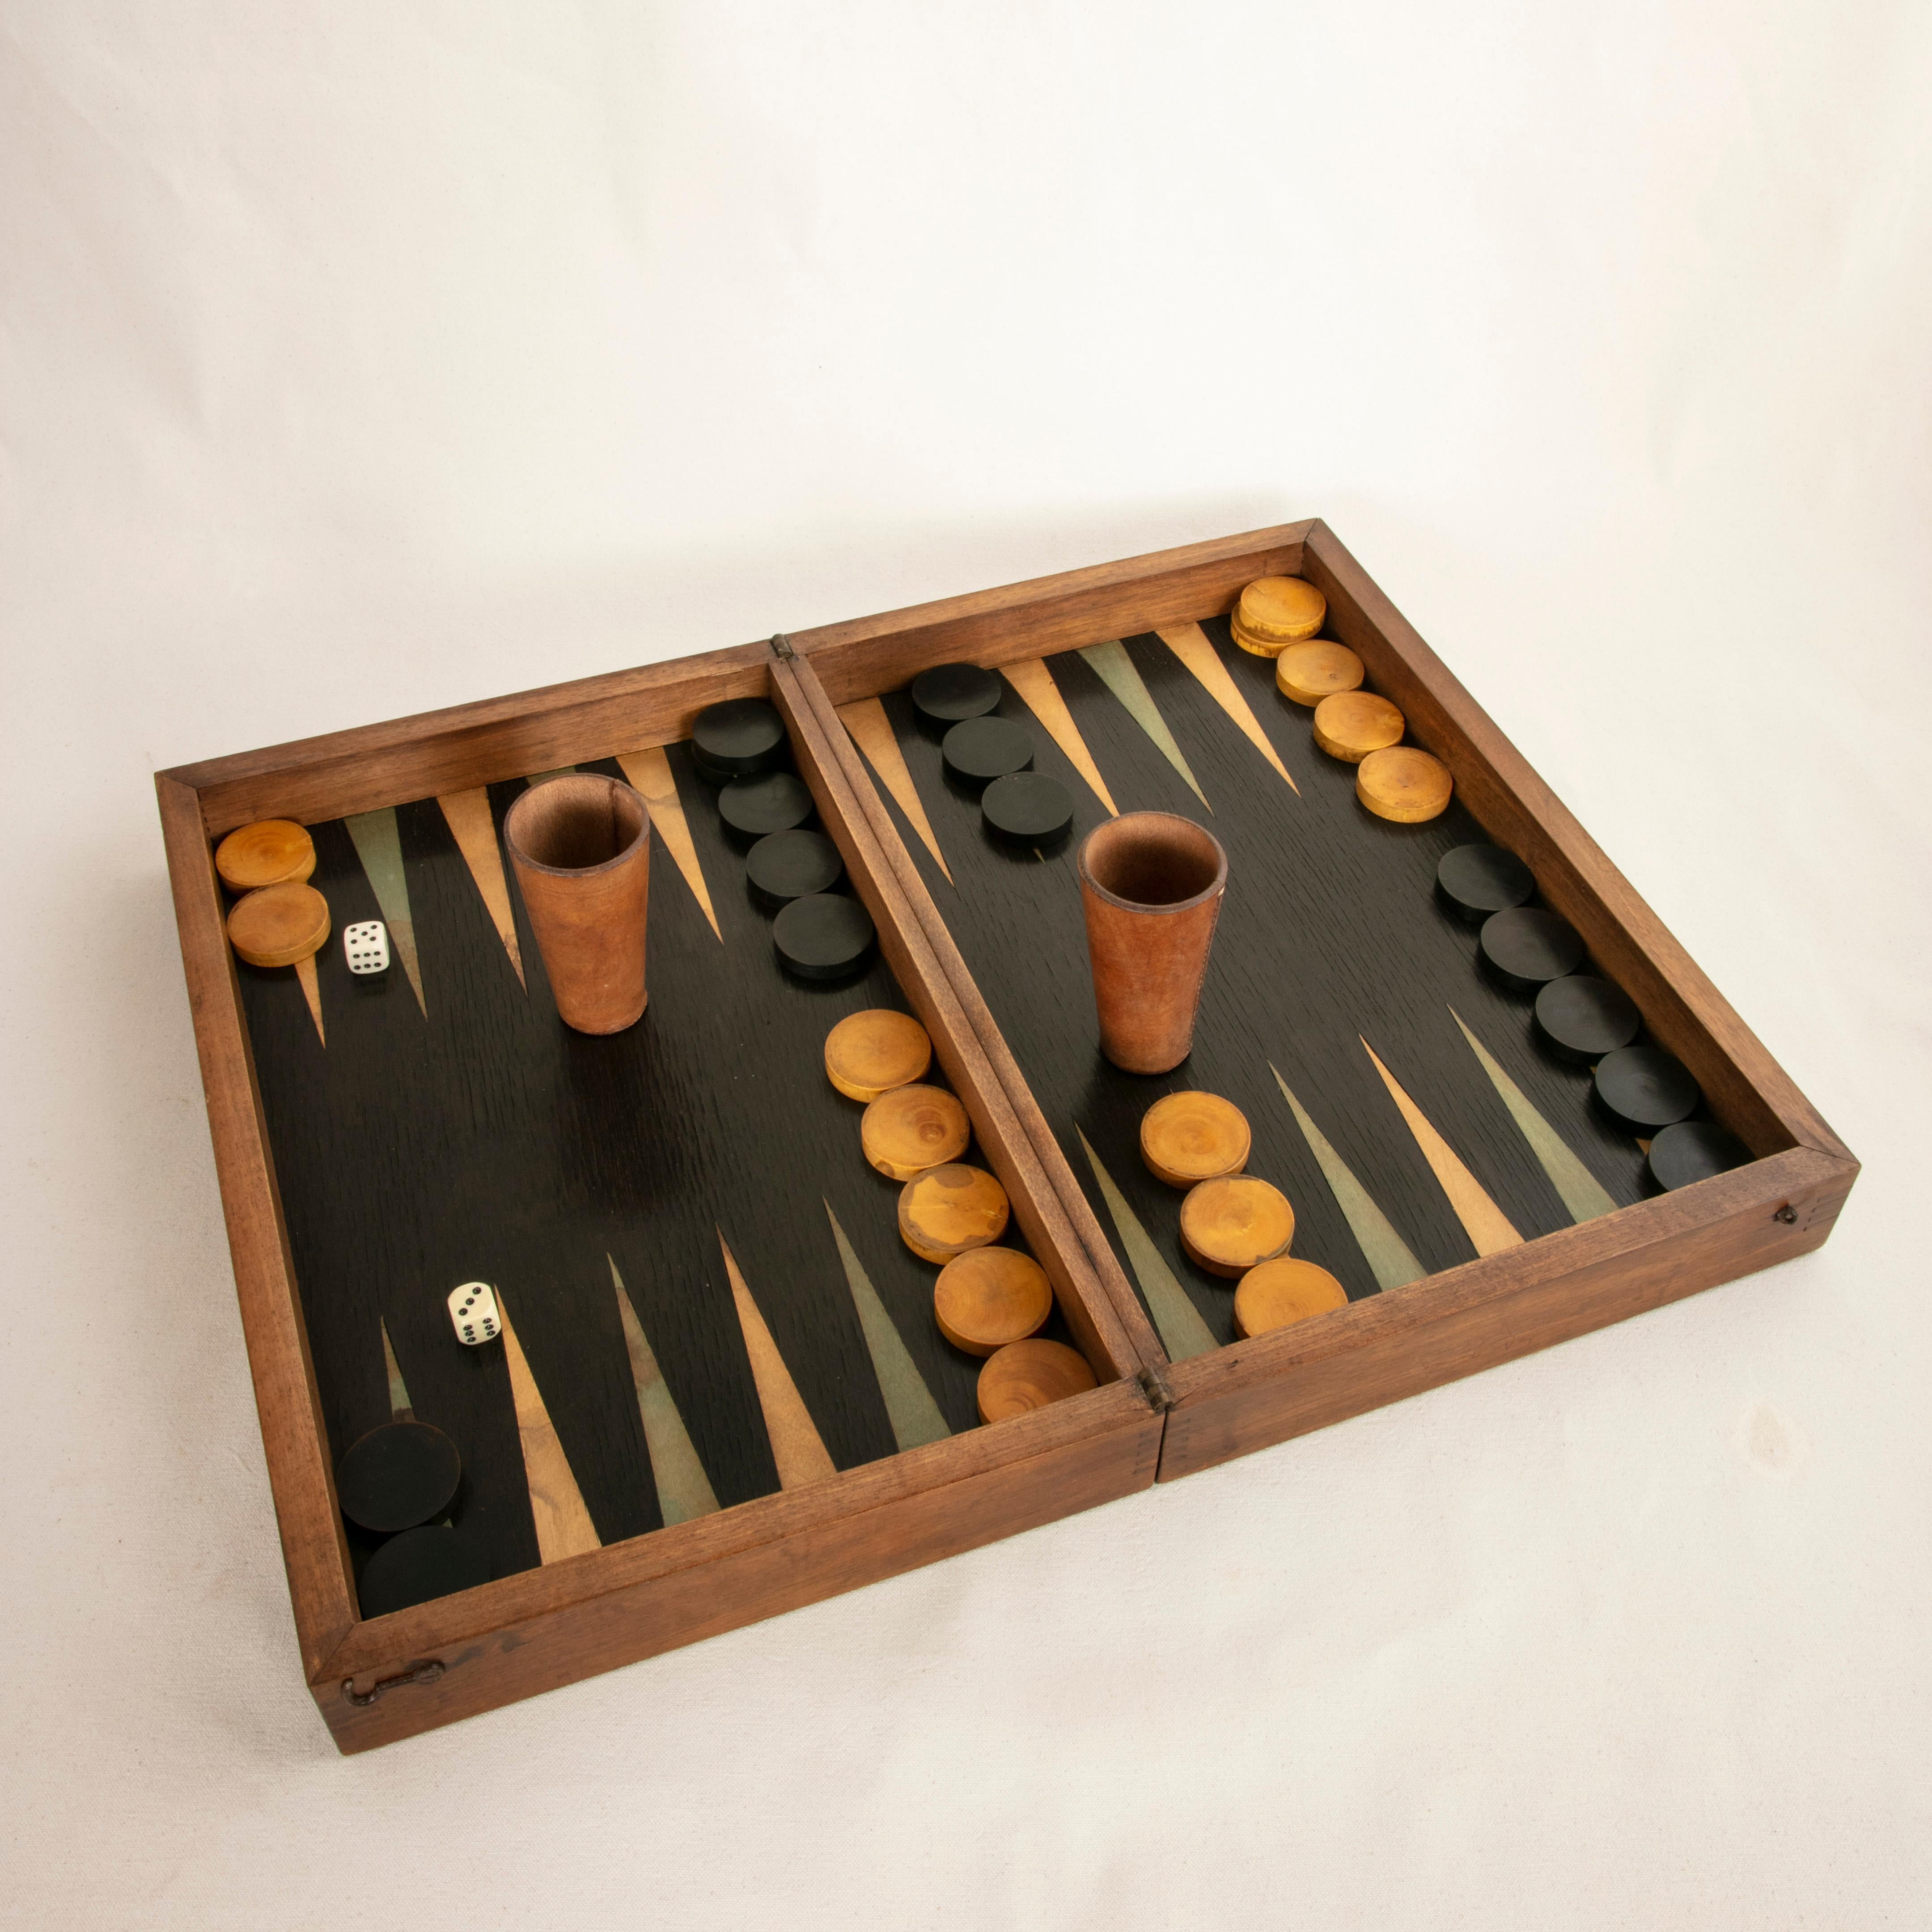 This French walnut marquetry folding game box from the turn of the 20th century is for checkers, chess, and backgammon. It is finely constructed with dovetailed corners, inset hinges, and a locking brass hook on each side. The checker board side of